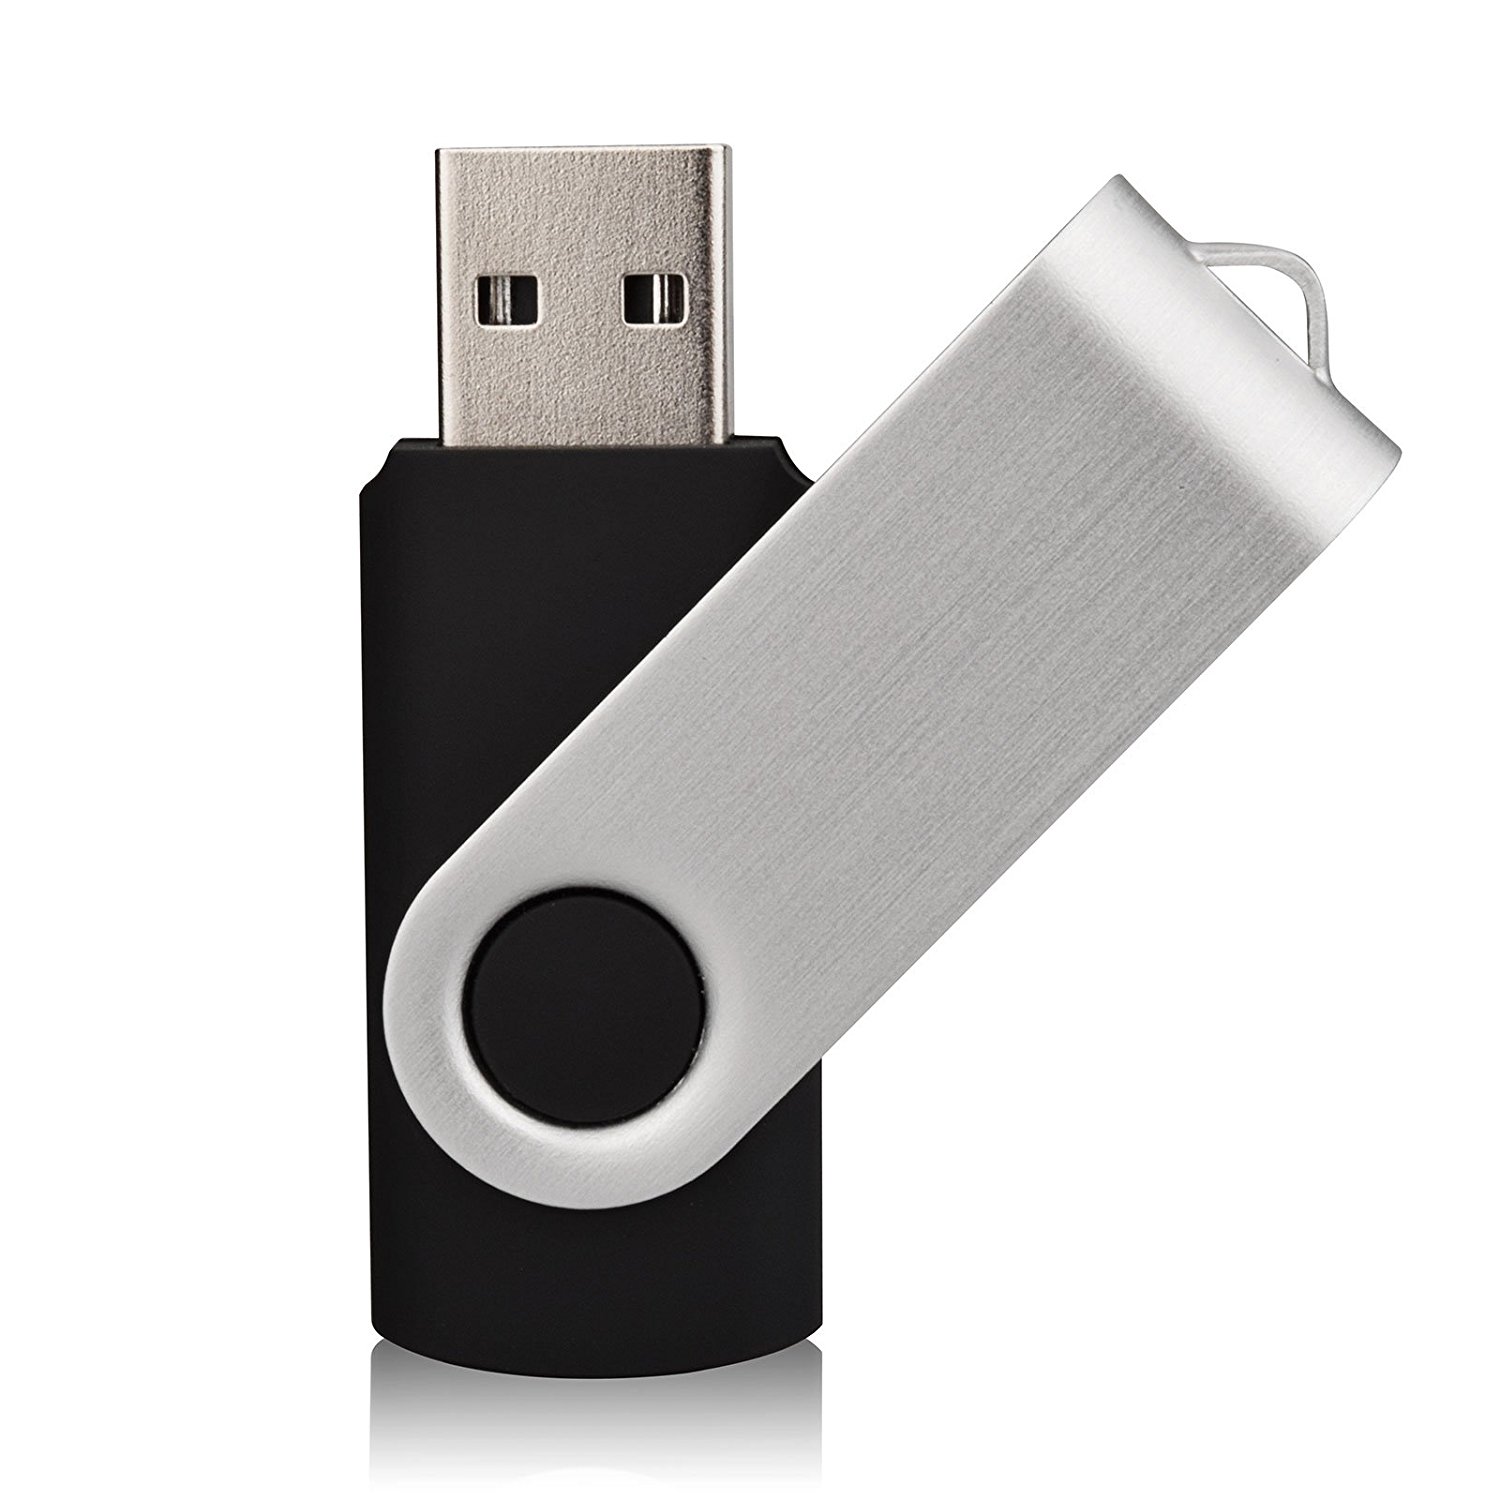 Promotional Swivel USB Drive Classic Model for 12 years Featured Image